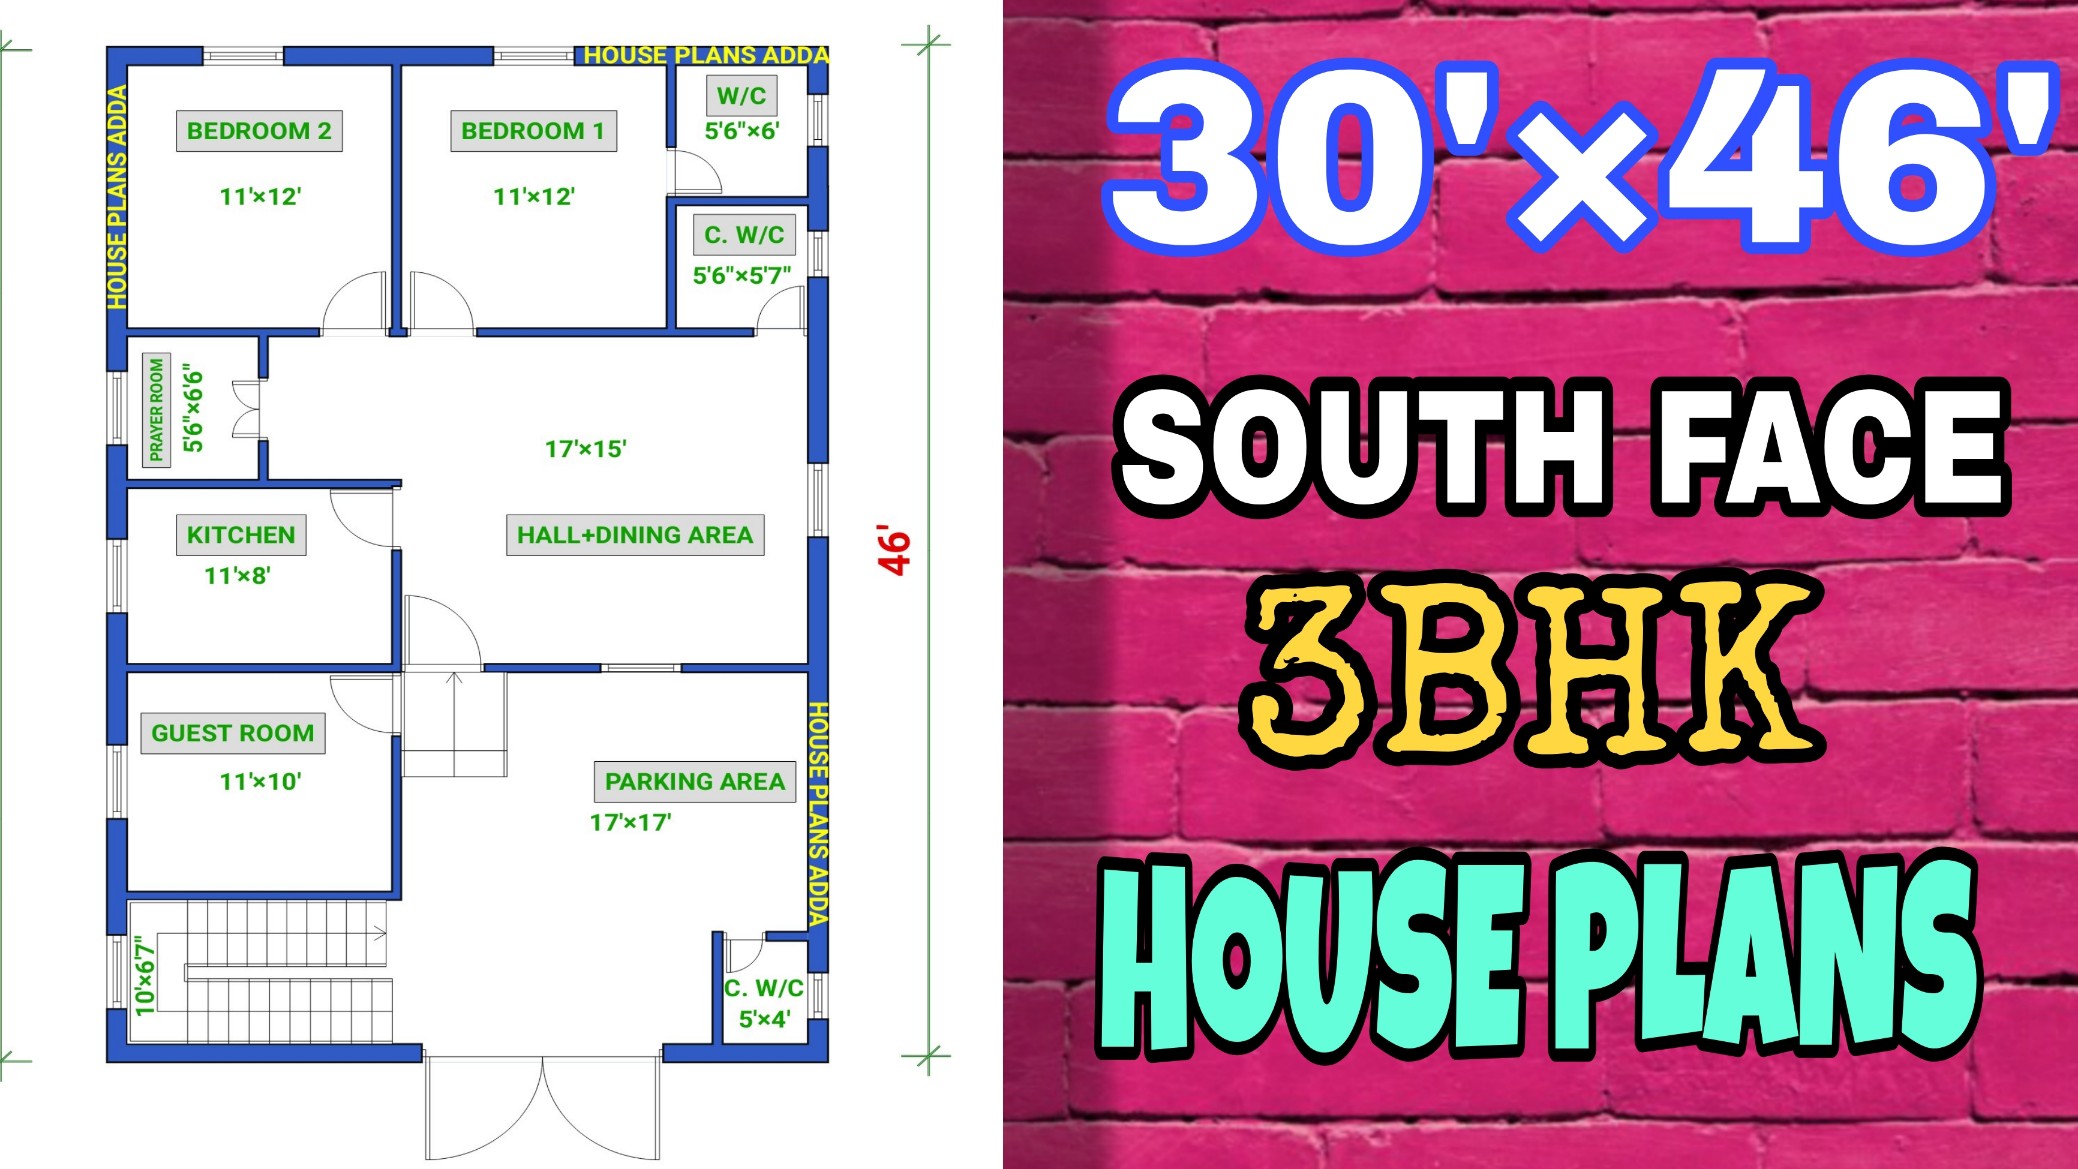 3bhk house plan south face